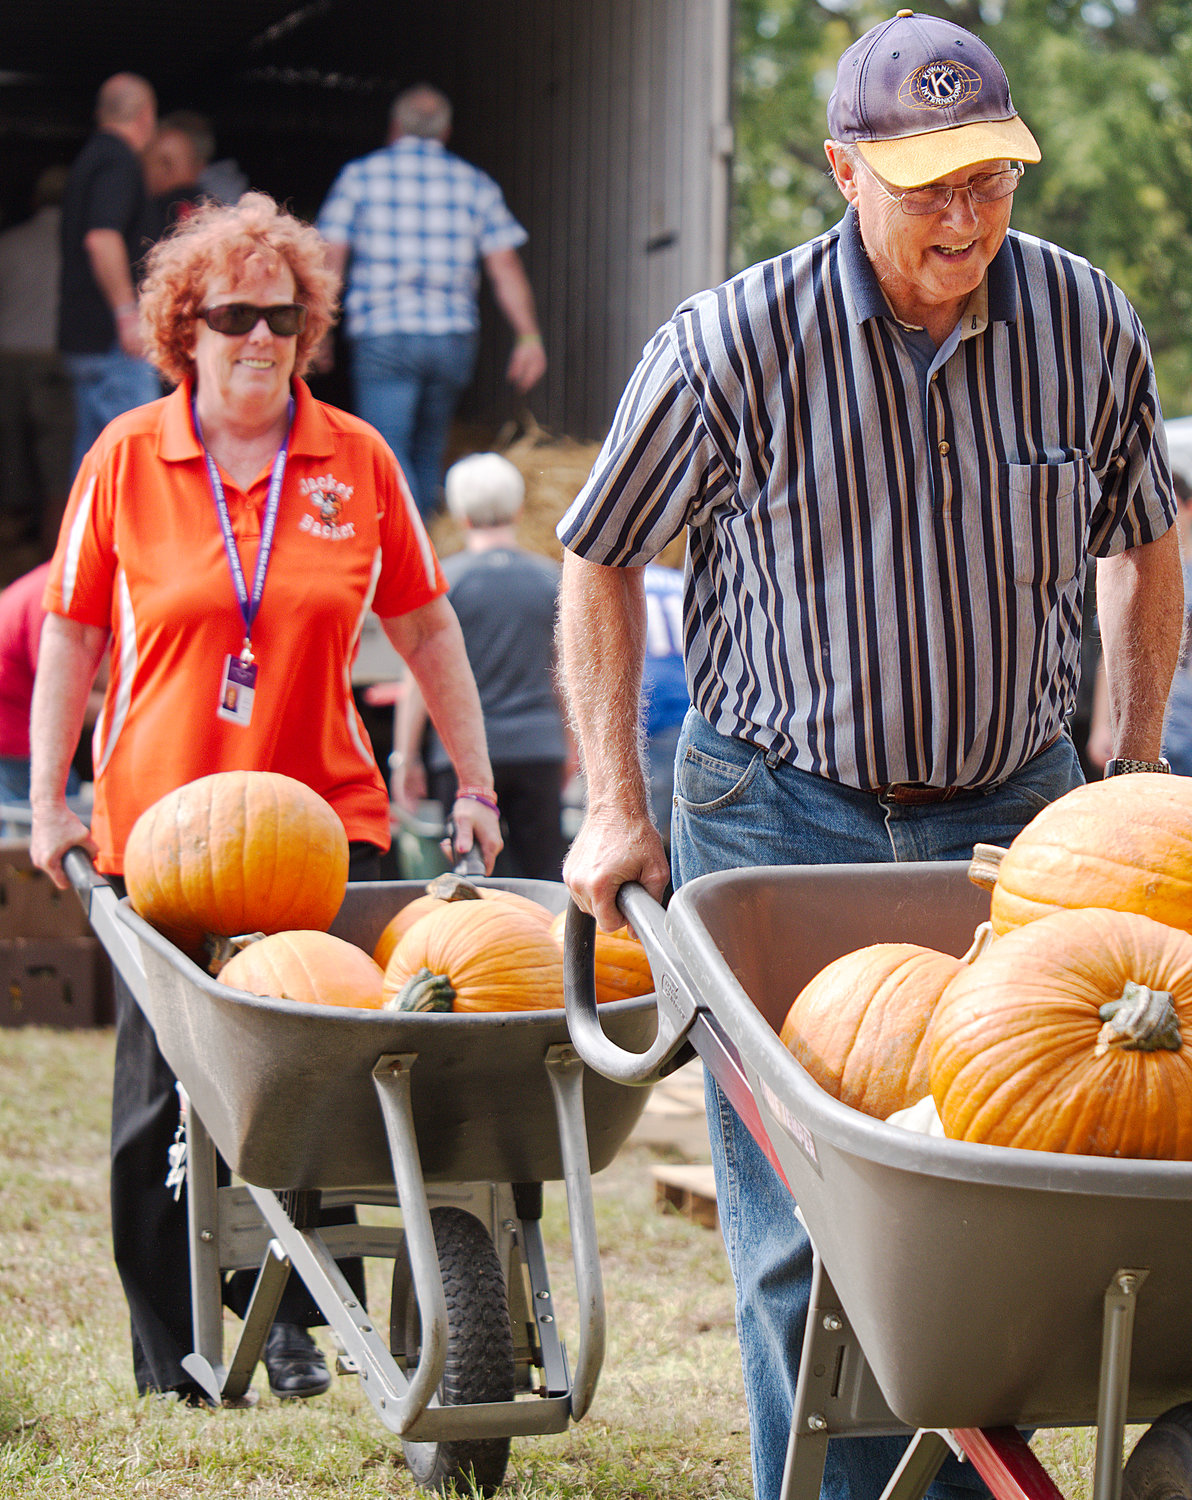 Sandy Bennett and Sam Curry wheel pumpkins from a truck at the First United Methodist Church in Mineola Monday in preparation for the church’s annual pumpkin patch, which raises money for various children’s ministries.